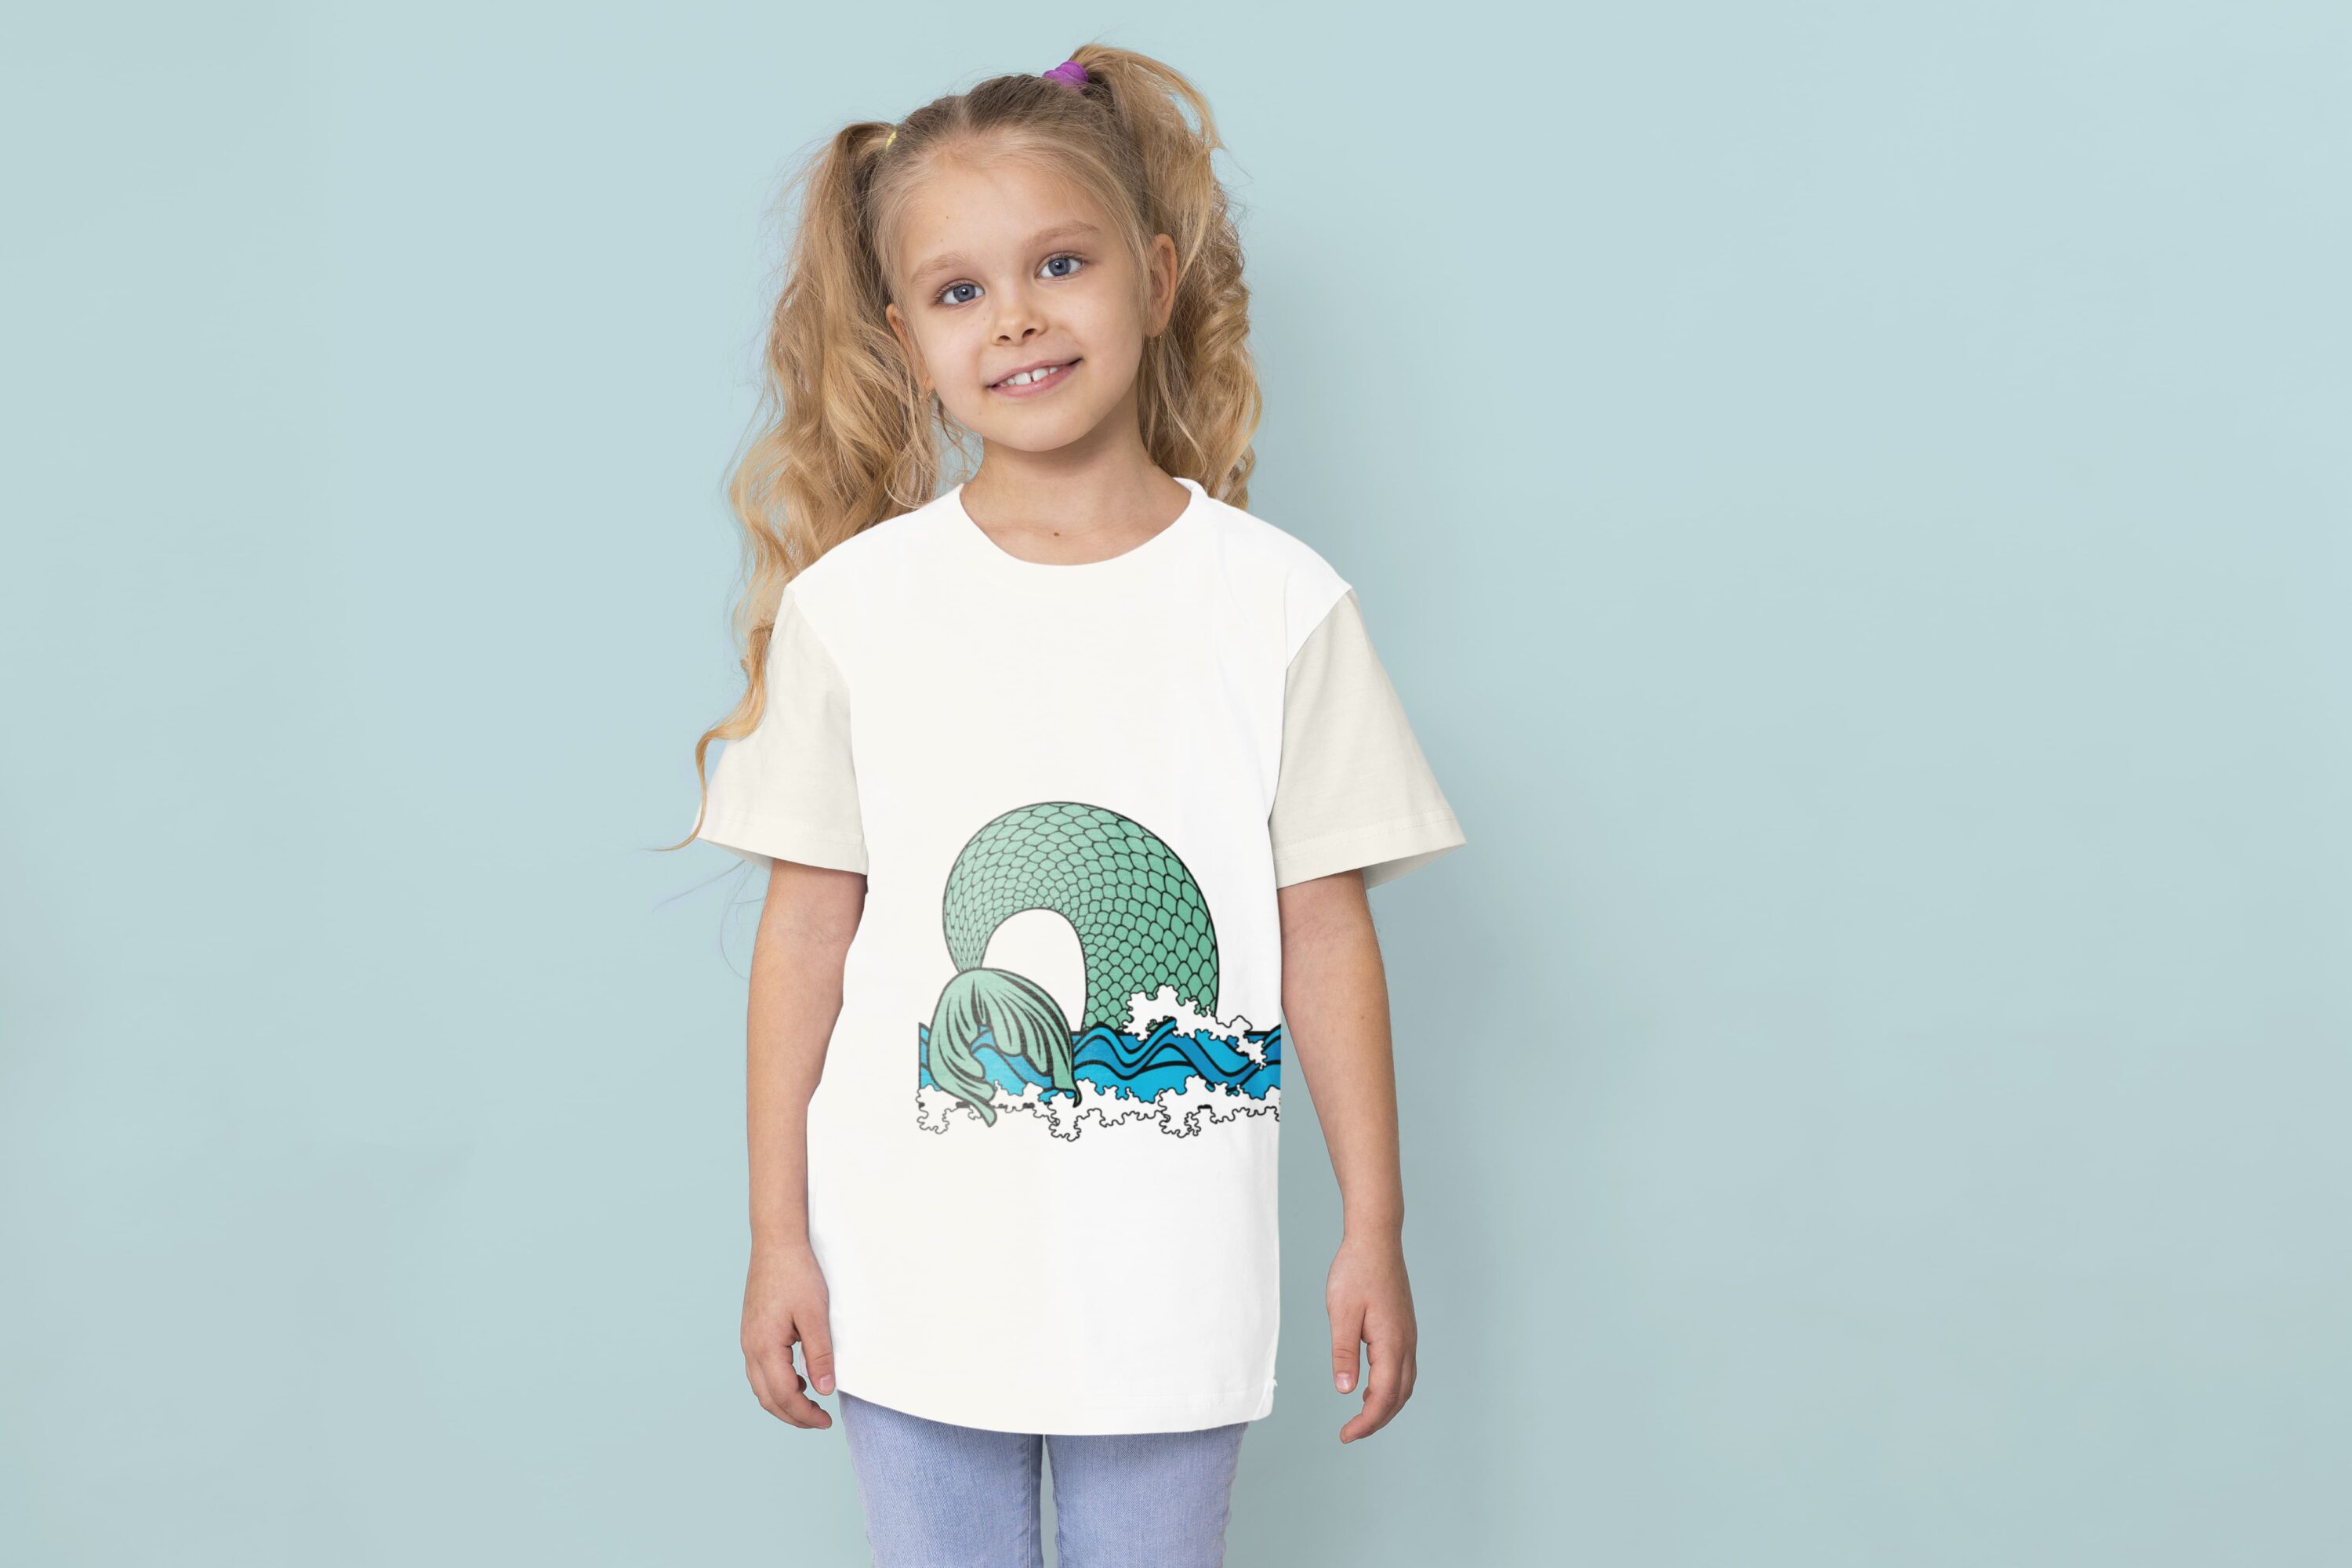 White t-shirt with the green mermaid tail.